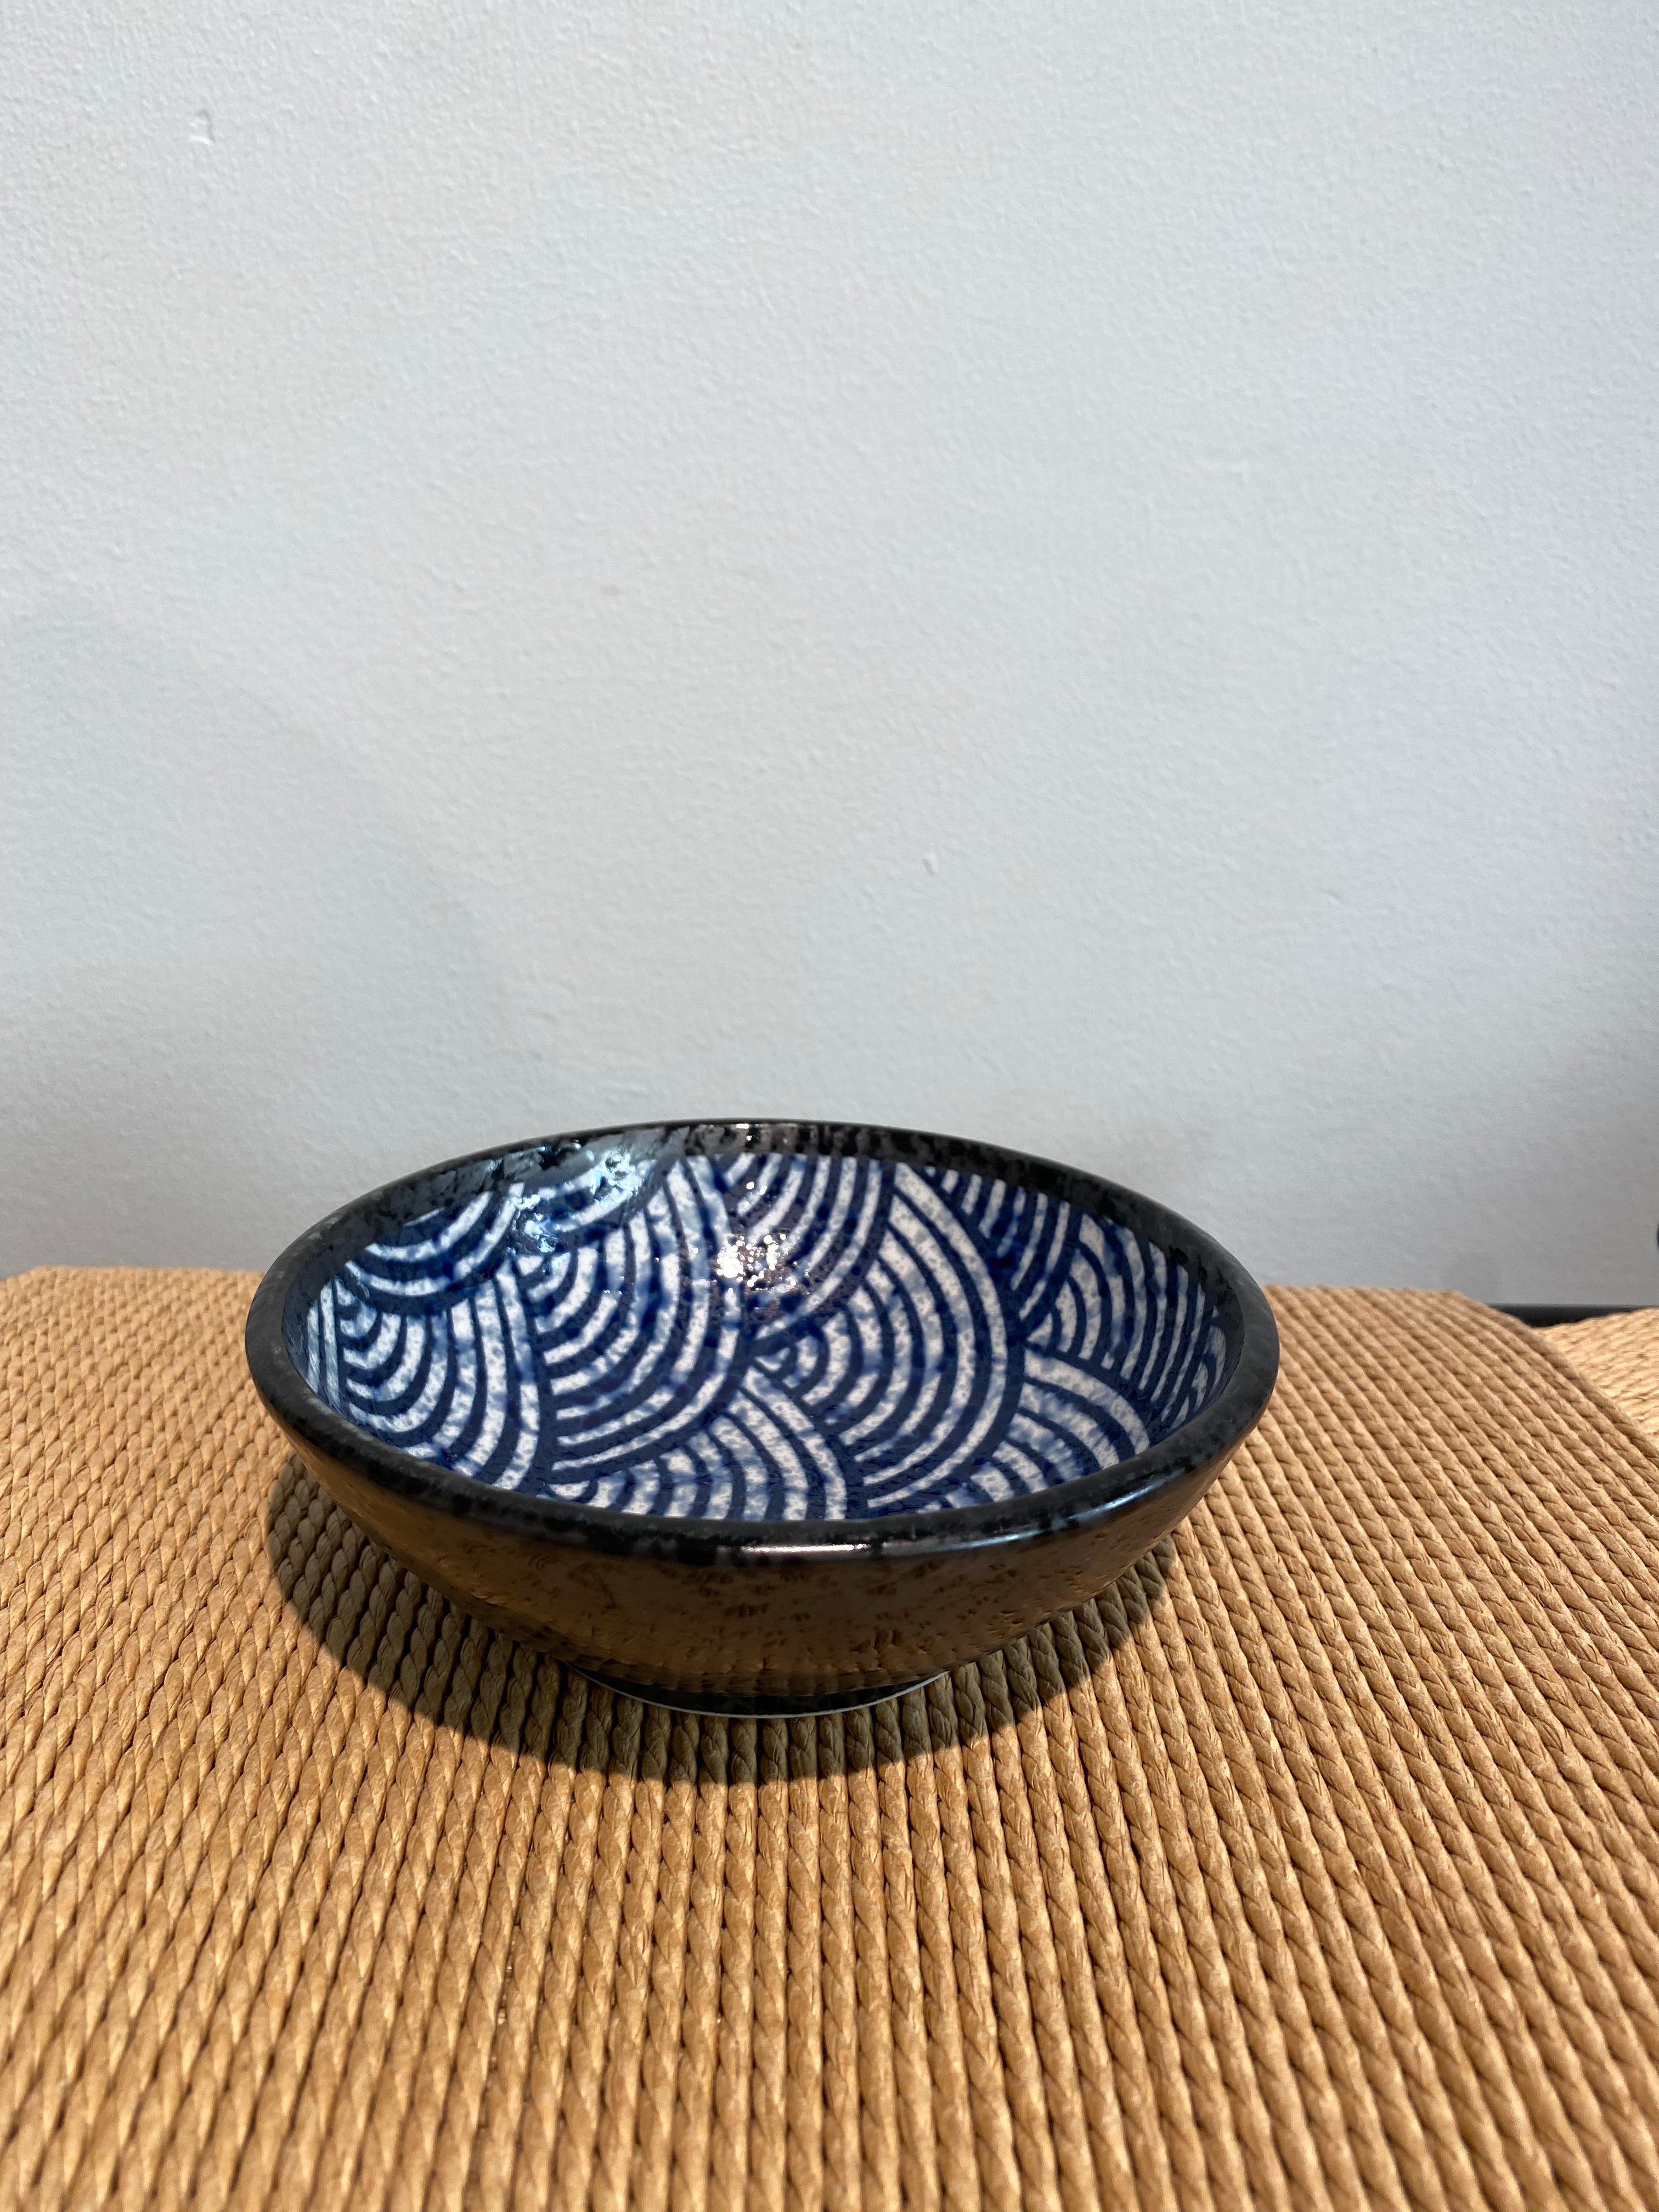 Small bowl with wave pattern and dark rim